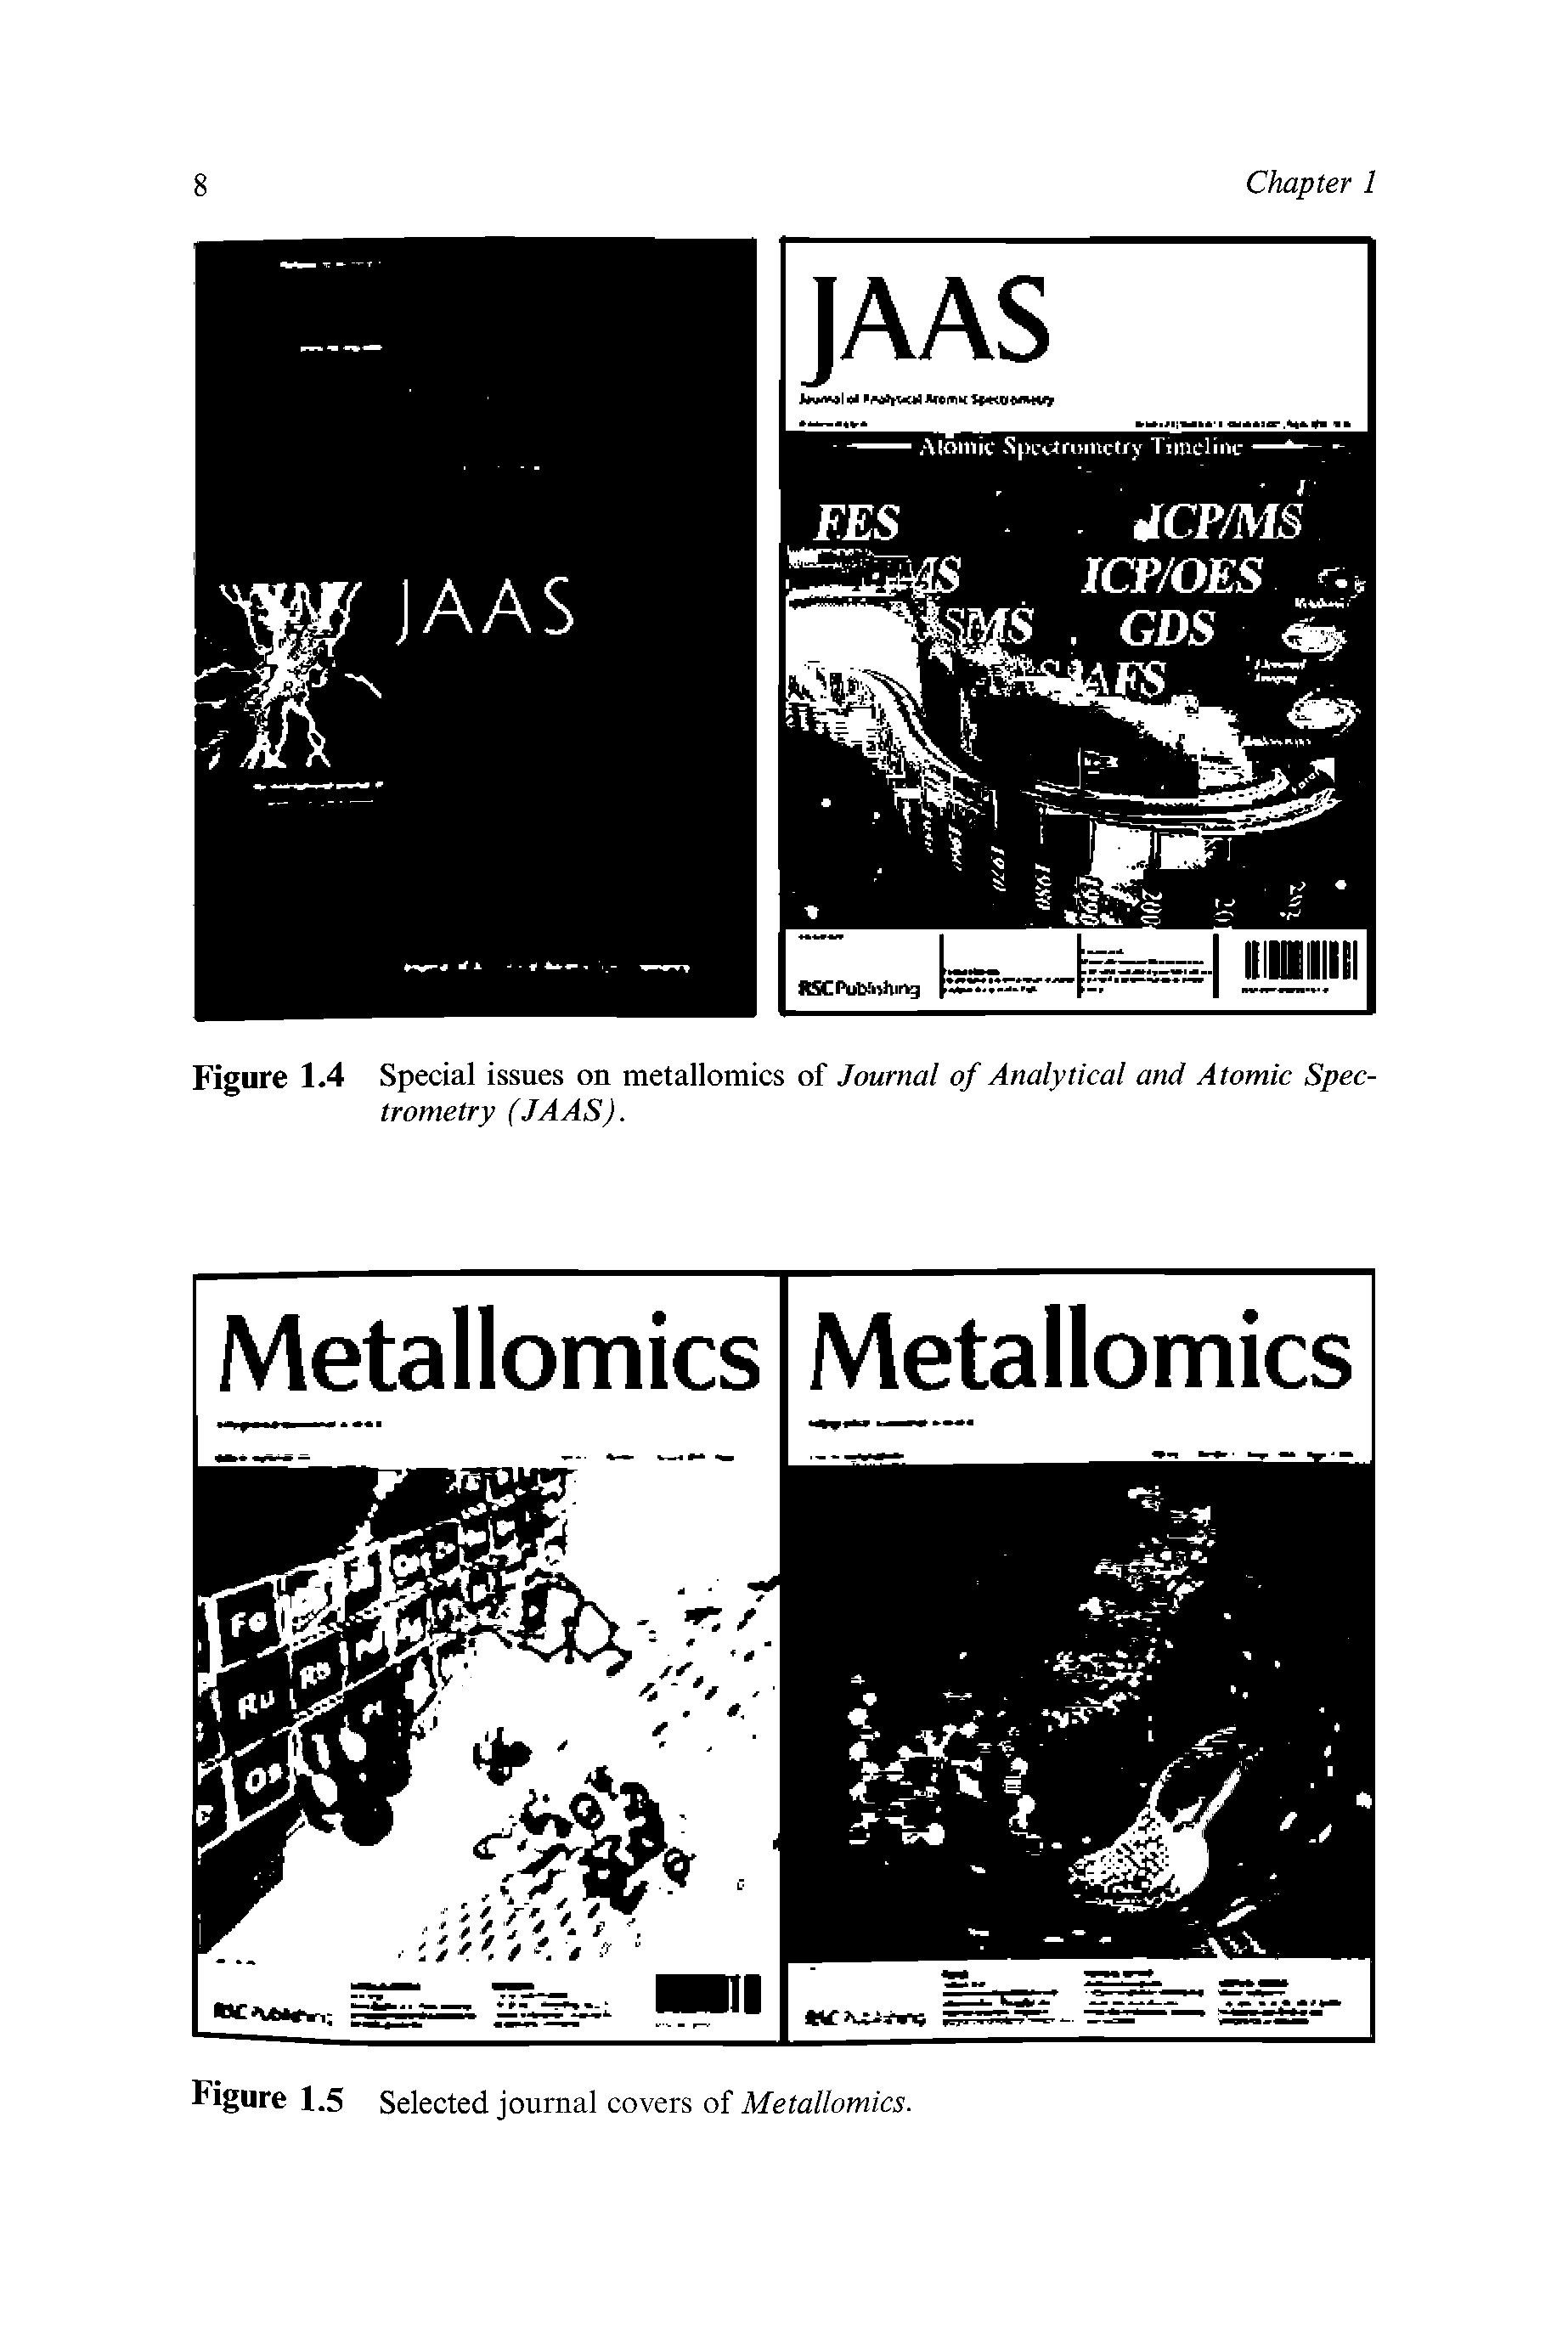 Figure 1.4 Special issues on metallomics of Journal of Analytical and Atomic Spectrometry (JAAS).